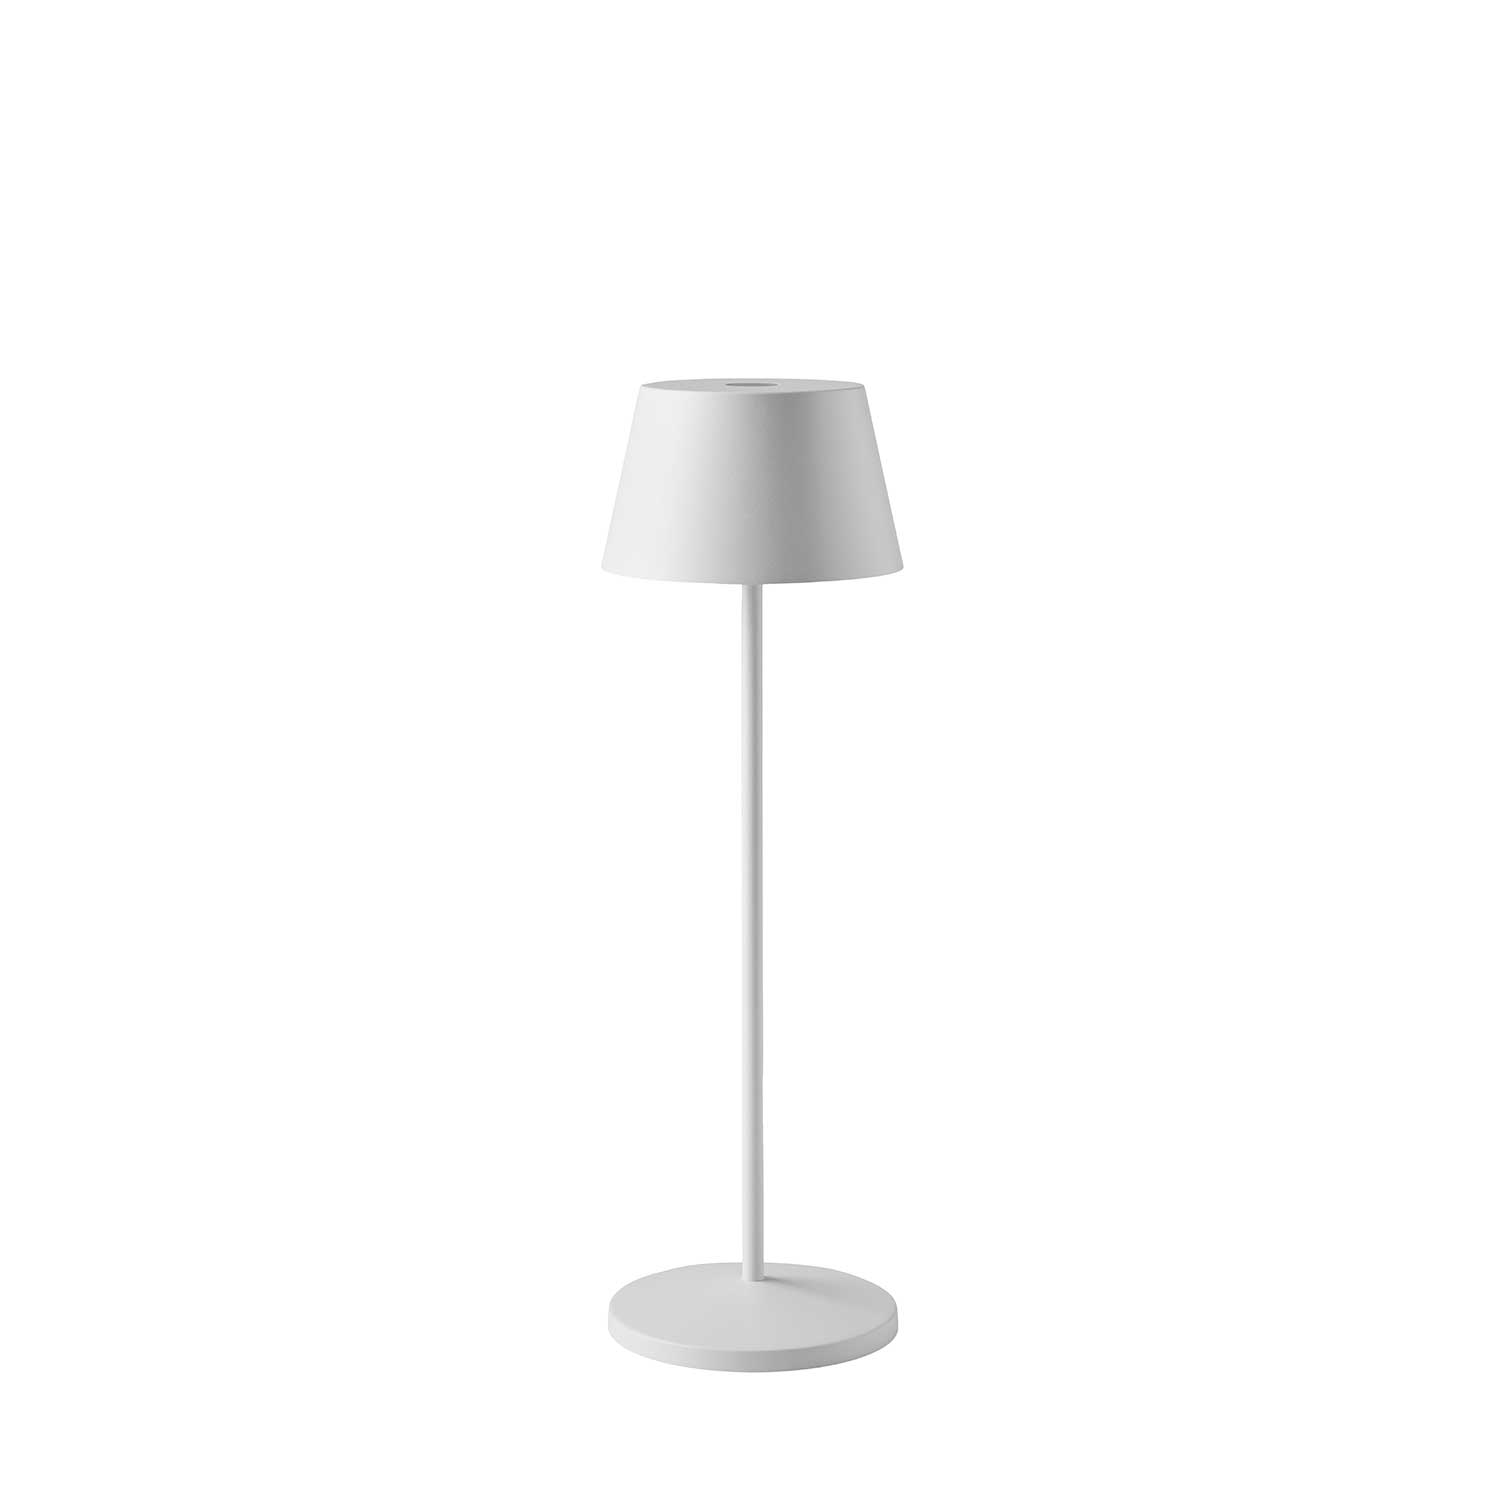 Modi White Battery Operated Table Lamp, Do They Make Battery Operated Table Lamps